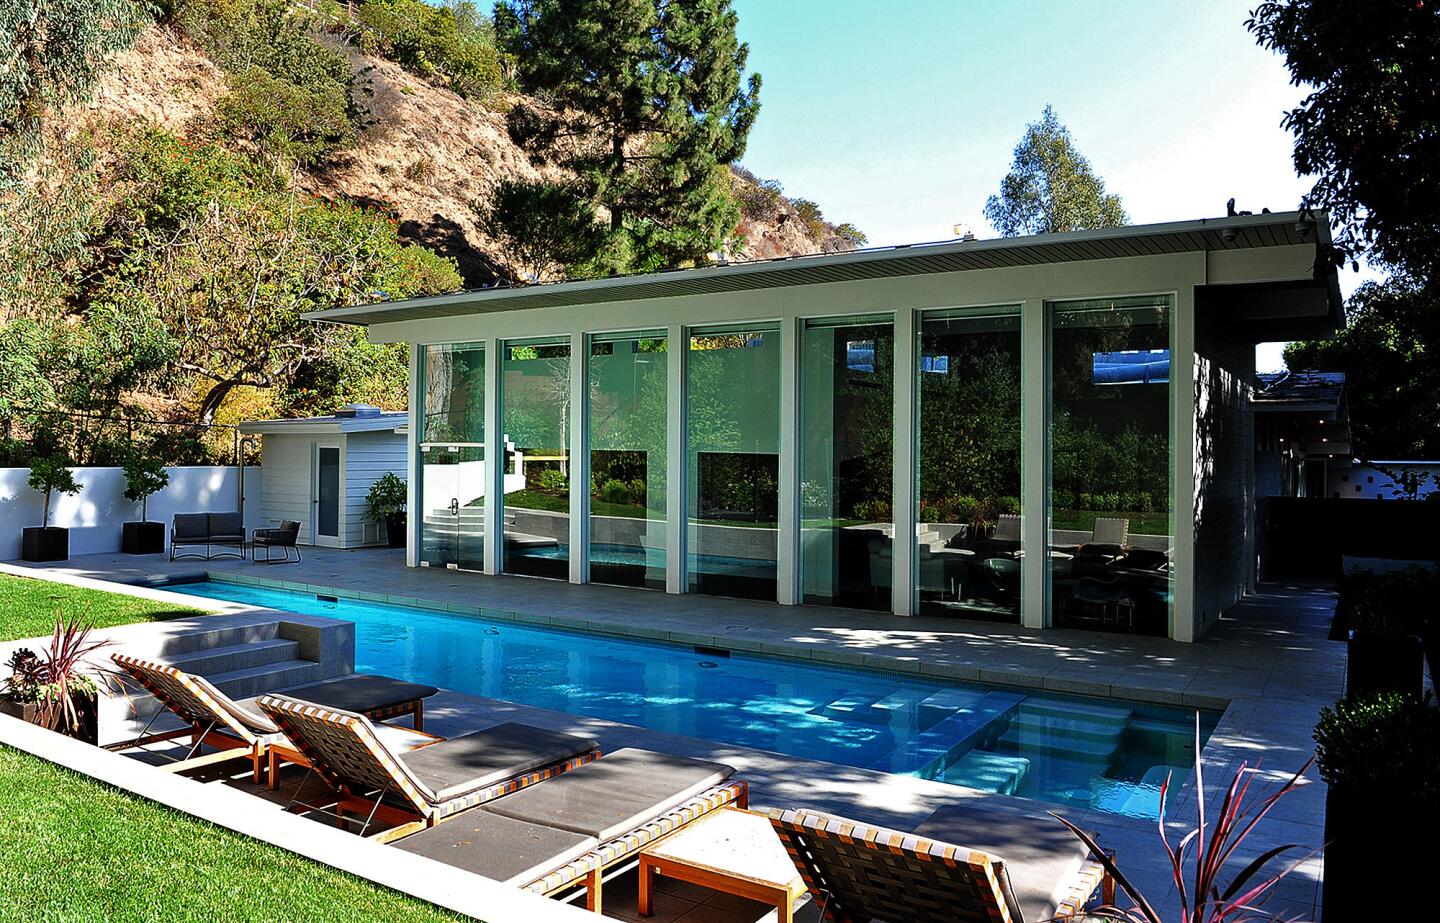 Hot Property | In an era of drought-tolerant everything, pools still boost an L.A. home’s value